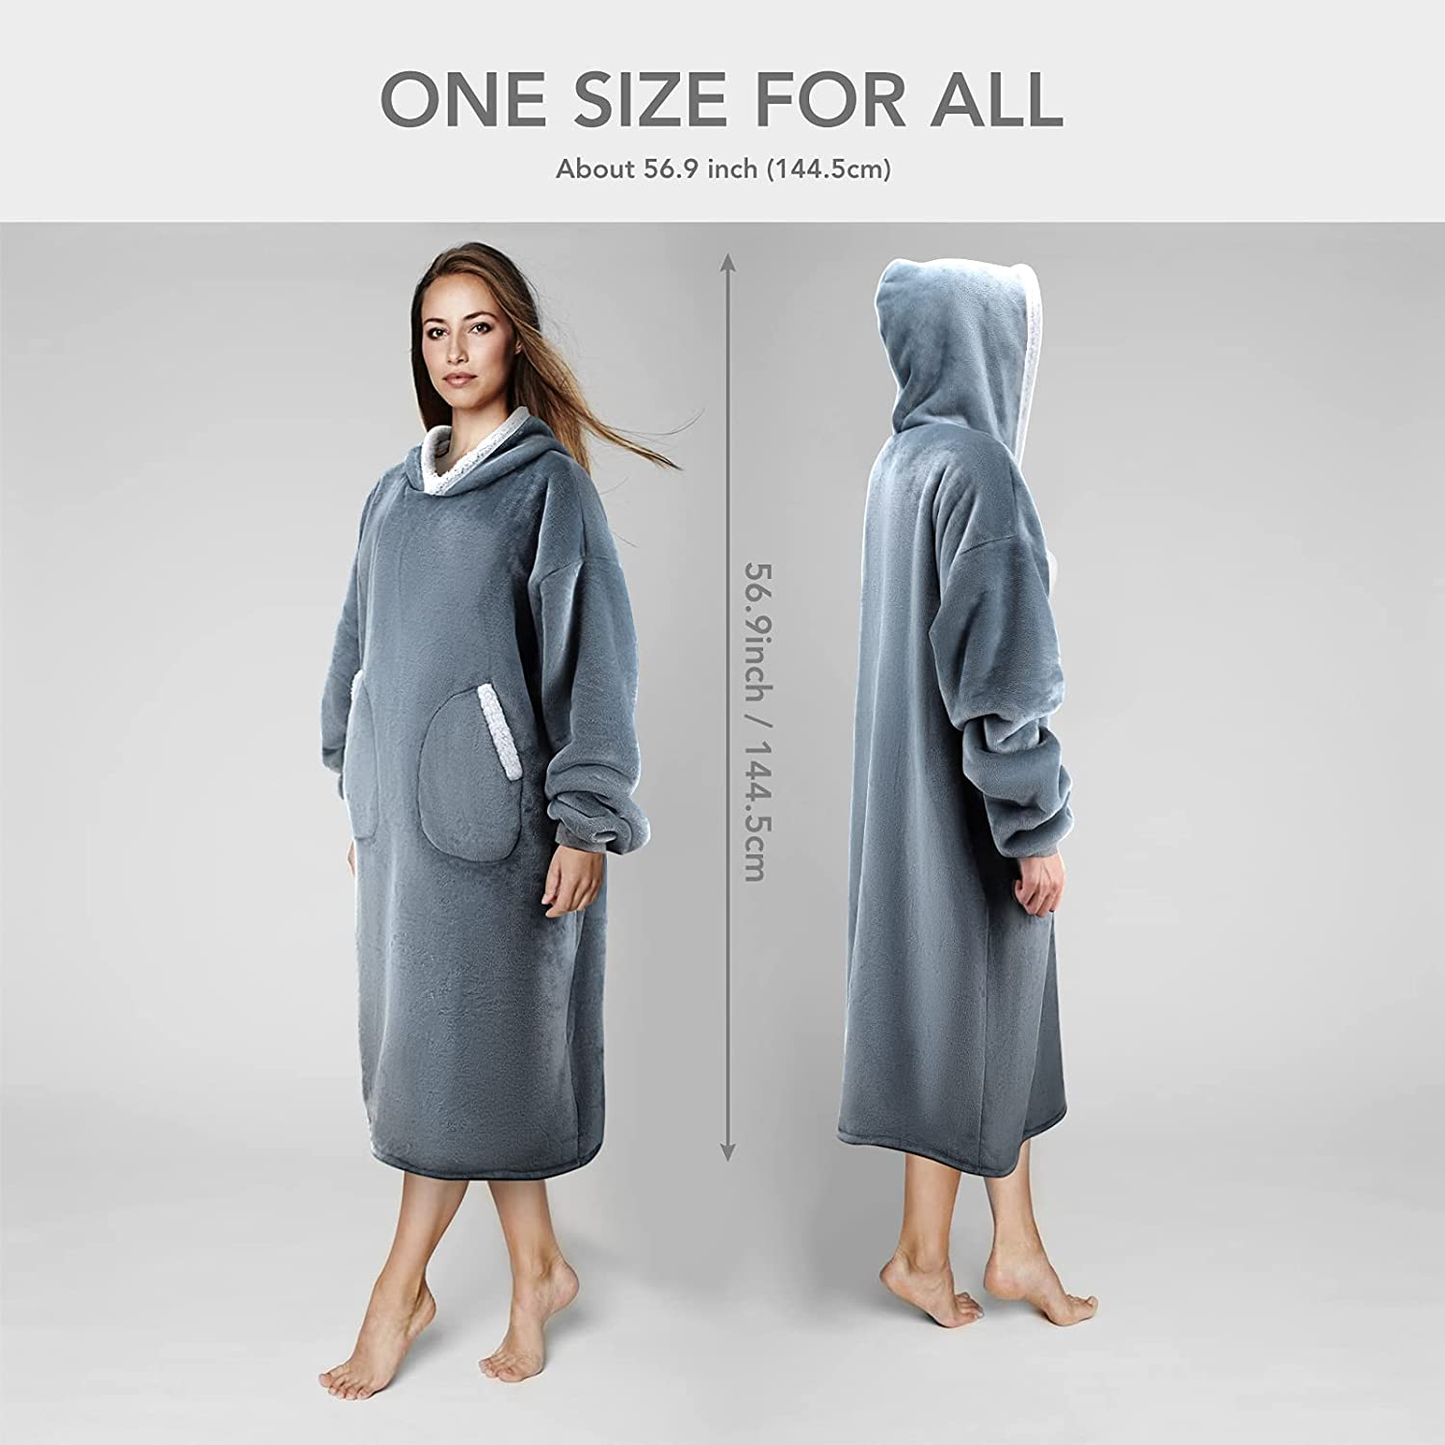 Oversized Adult Wearable Blanket Hoodie with Long Sleeves, Large Pocket and Hood for Men Women, Warm and Cozy Thick Flannel Blanket